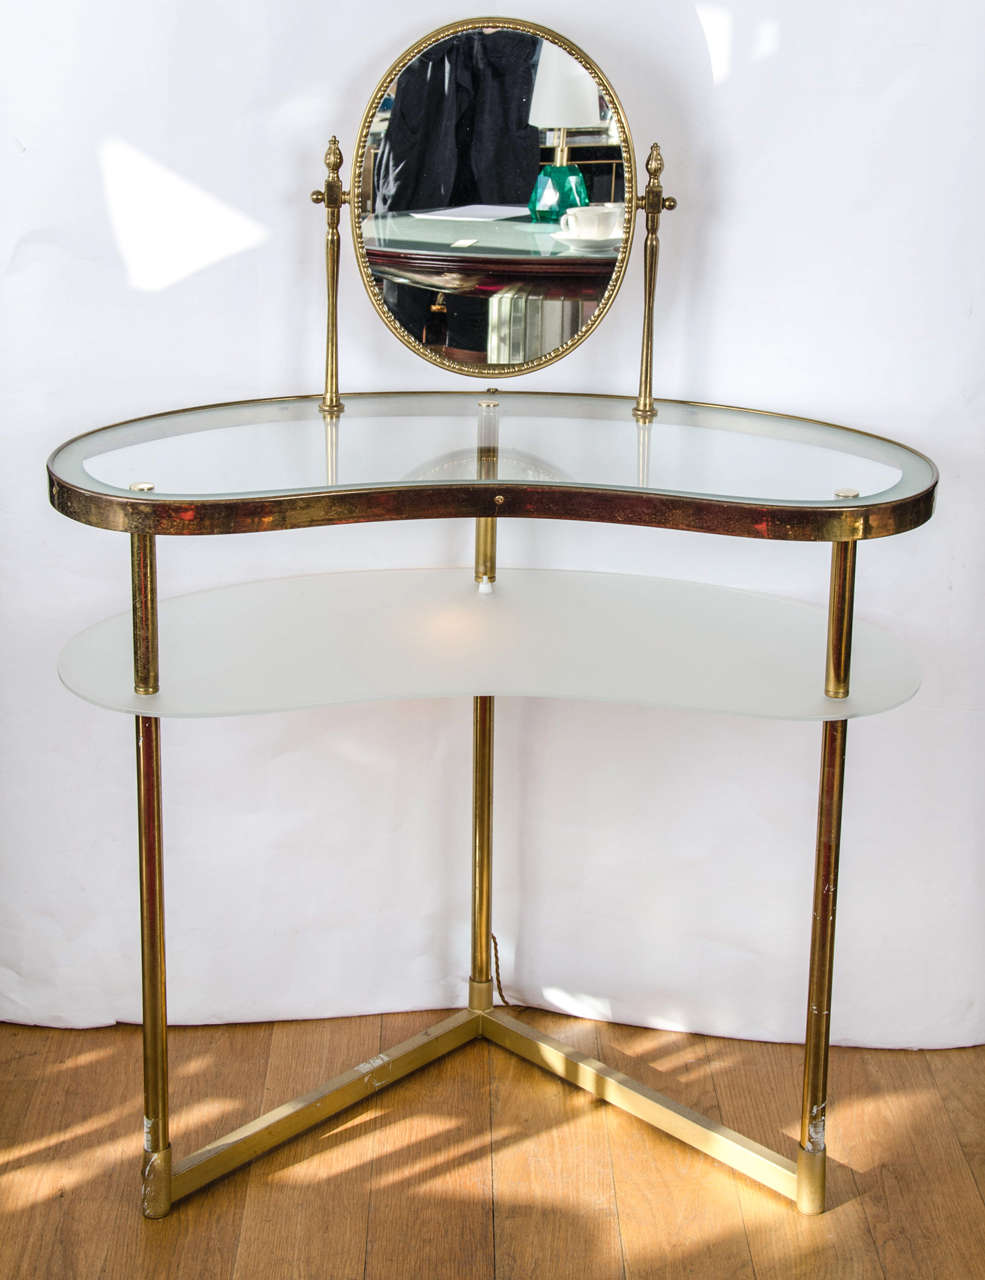 Two-tiered 1950s Dressing Table with integral oval mirror, the lower shelf in etched glass and having a switch operating a fitted light, all on a tripod base